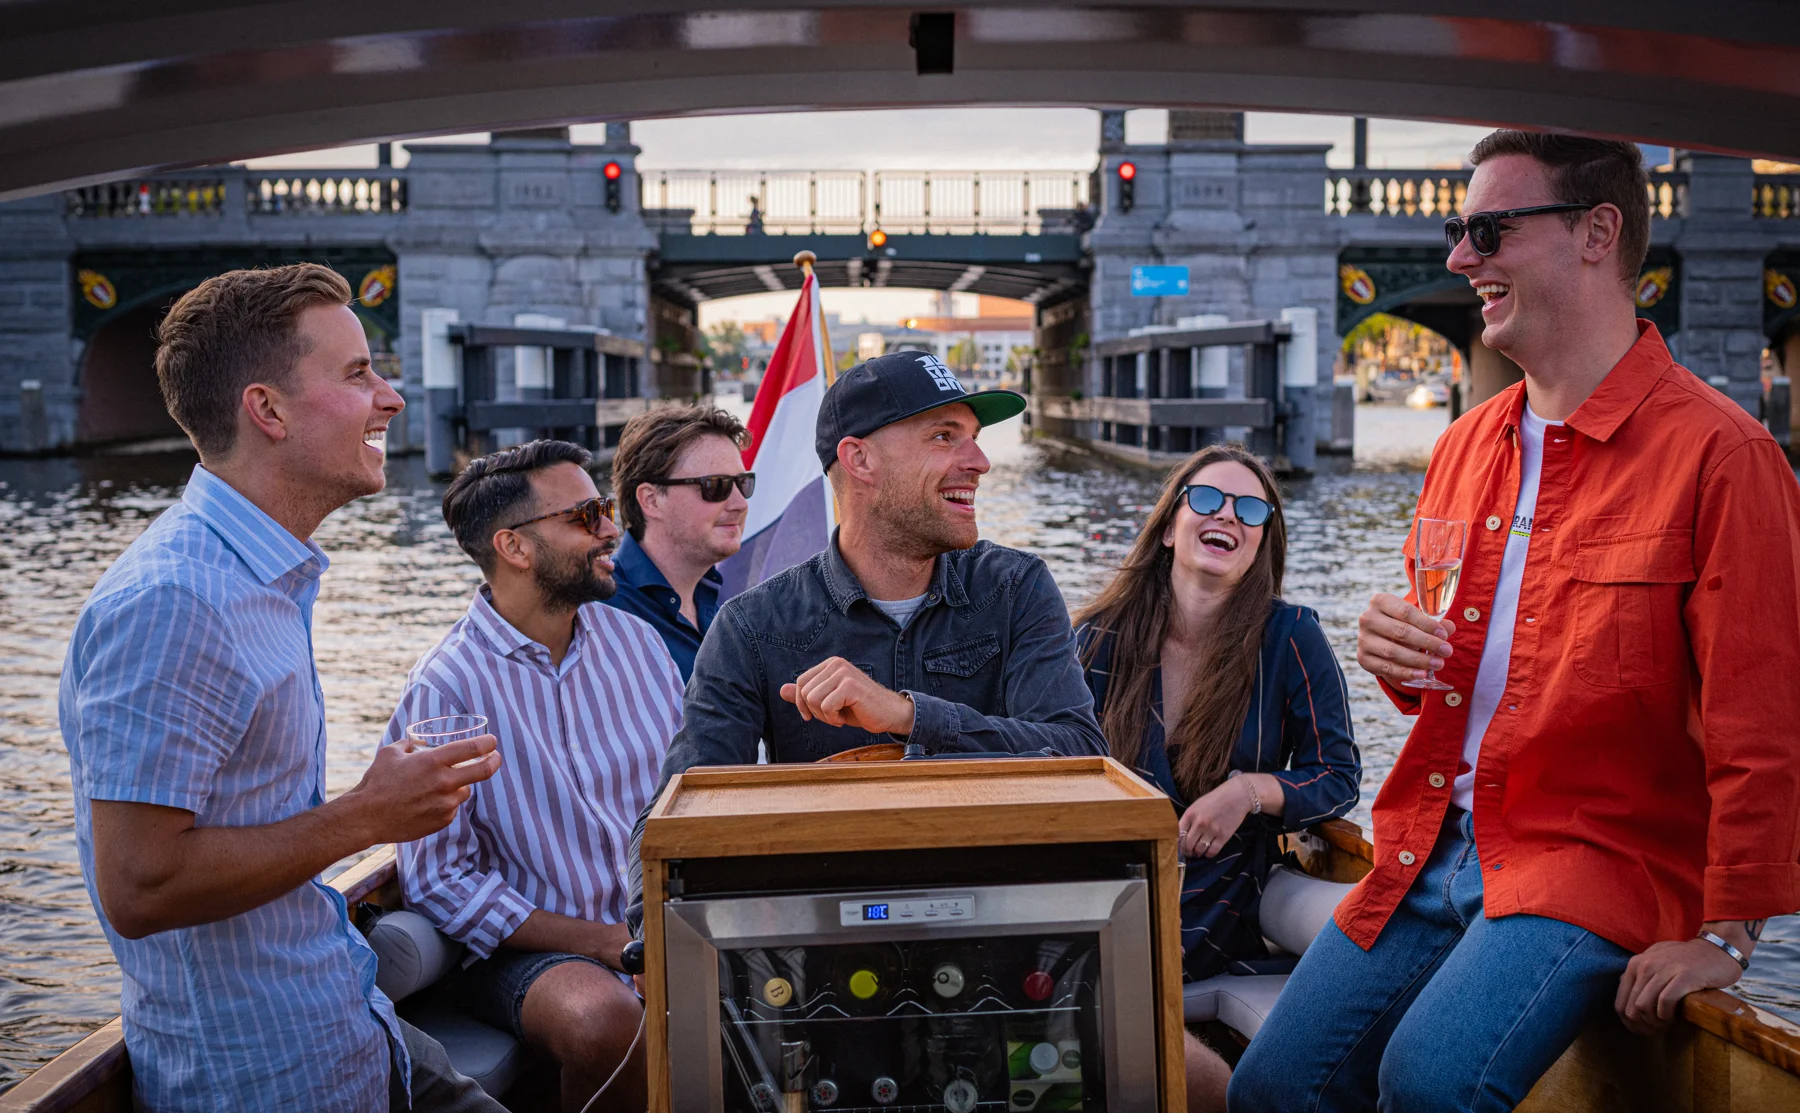 Unlimited Wine Tasting  in Historic Saloon Boat: A Cruise Through Amsterdam's Canals - 1284843